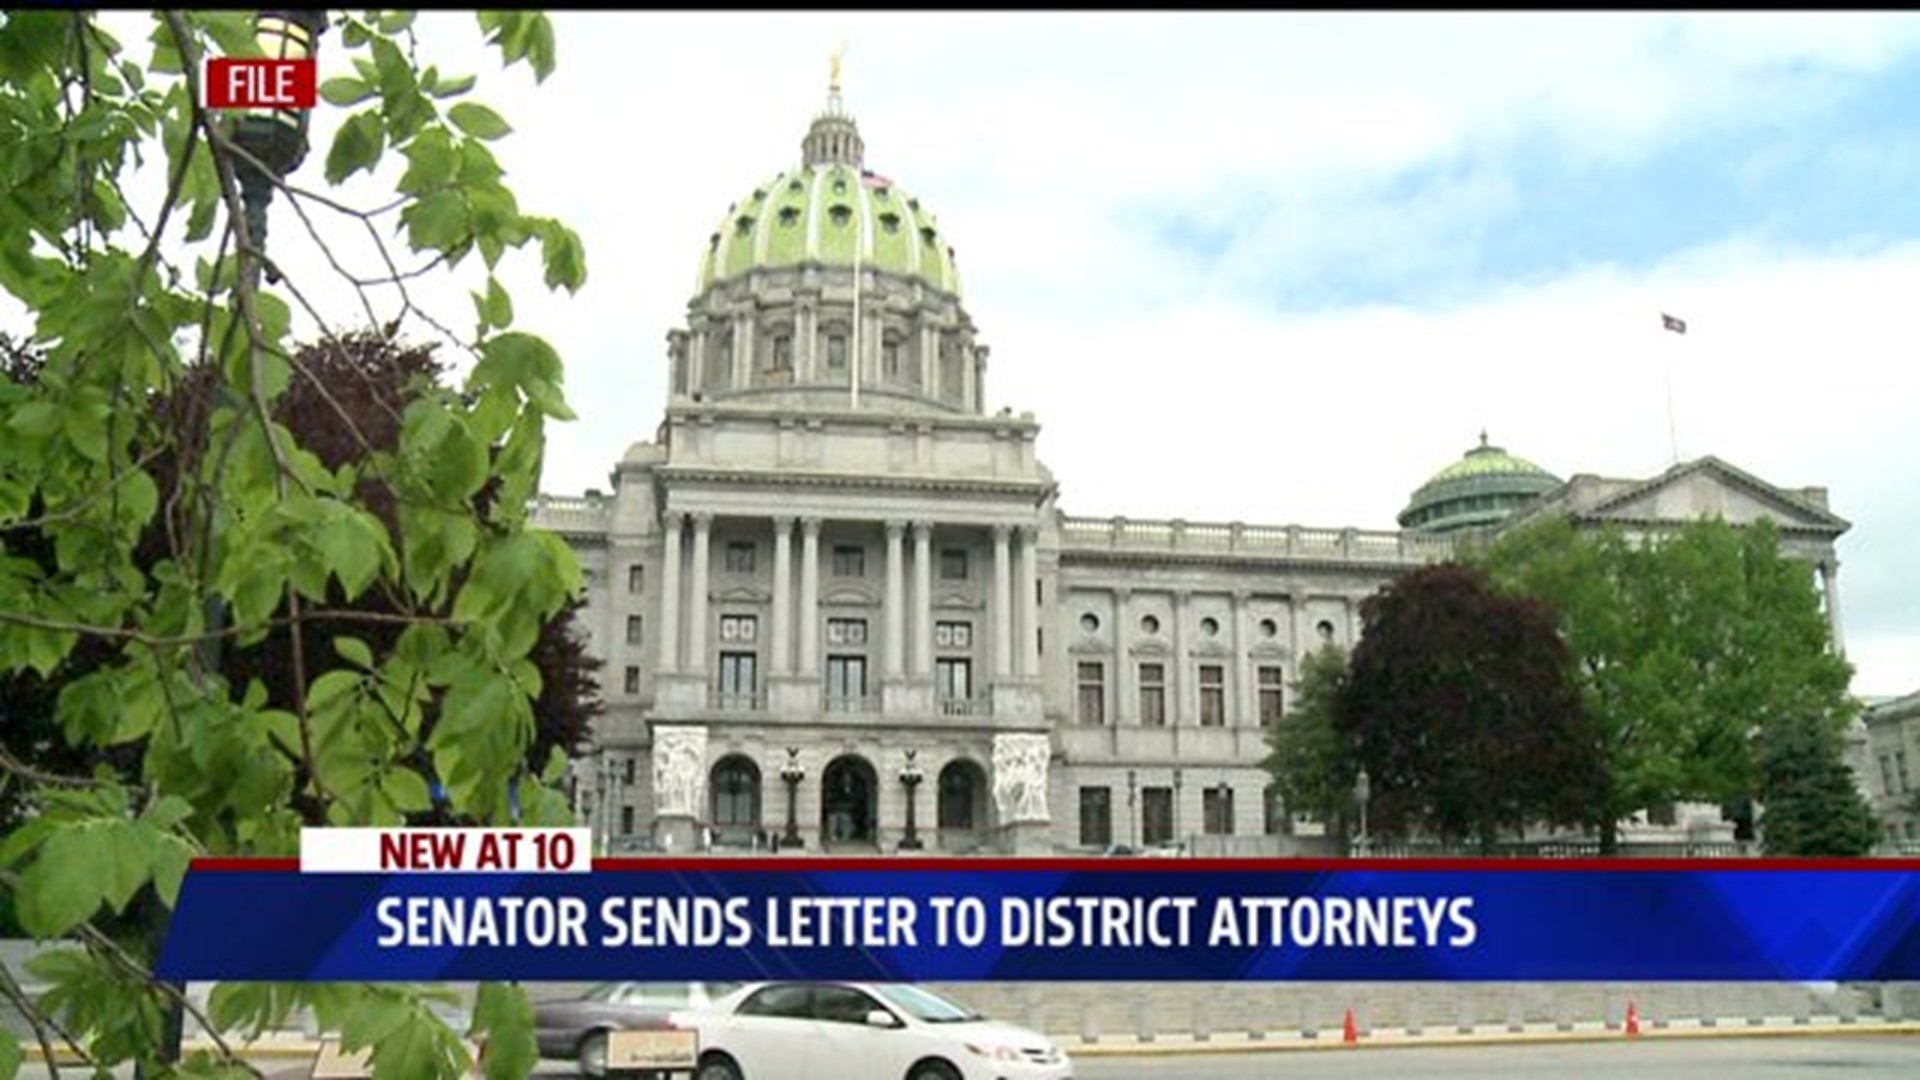 Petitioning for an "Act of Compassion" from Pennsylvania District Attorneys